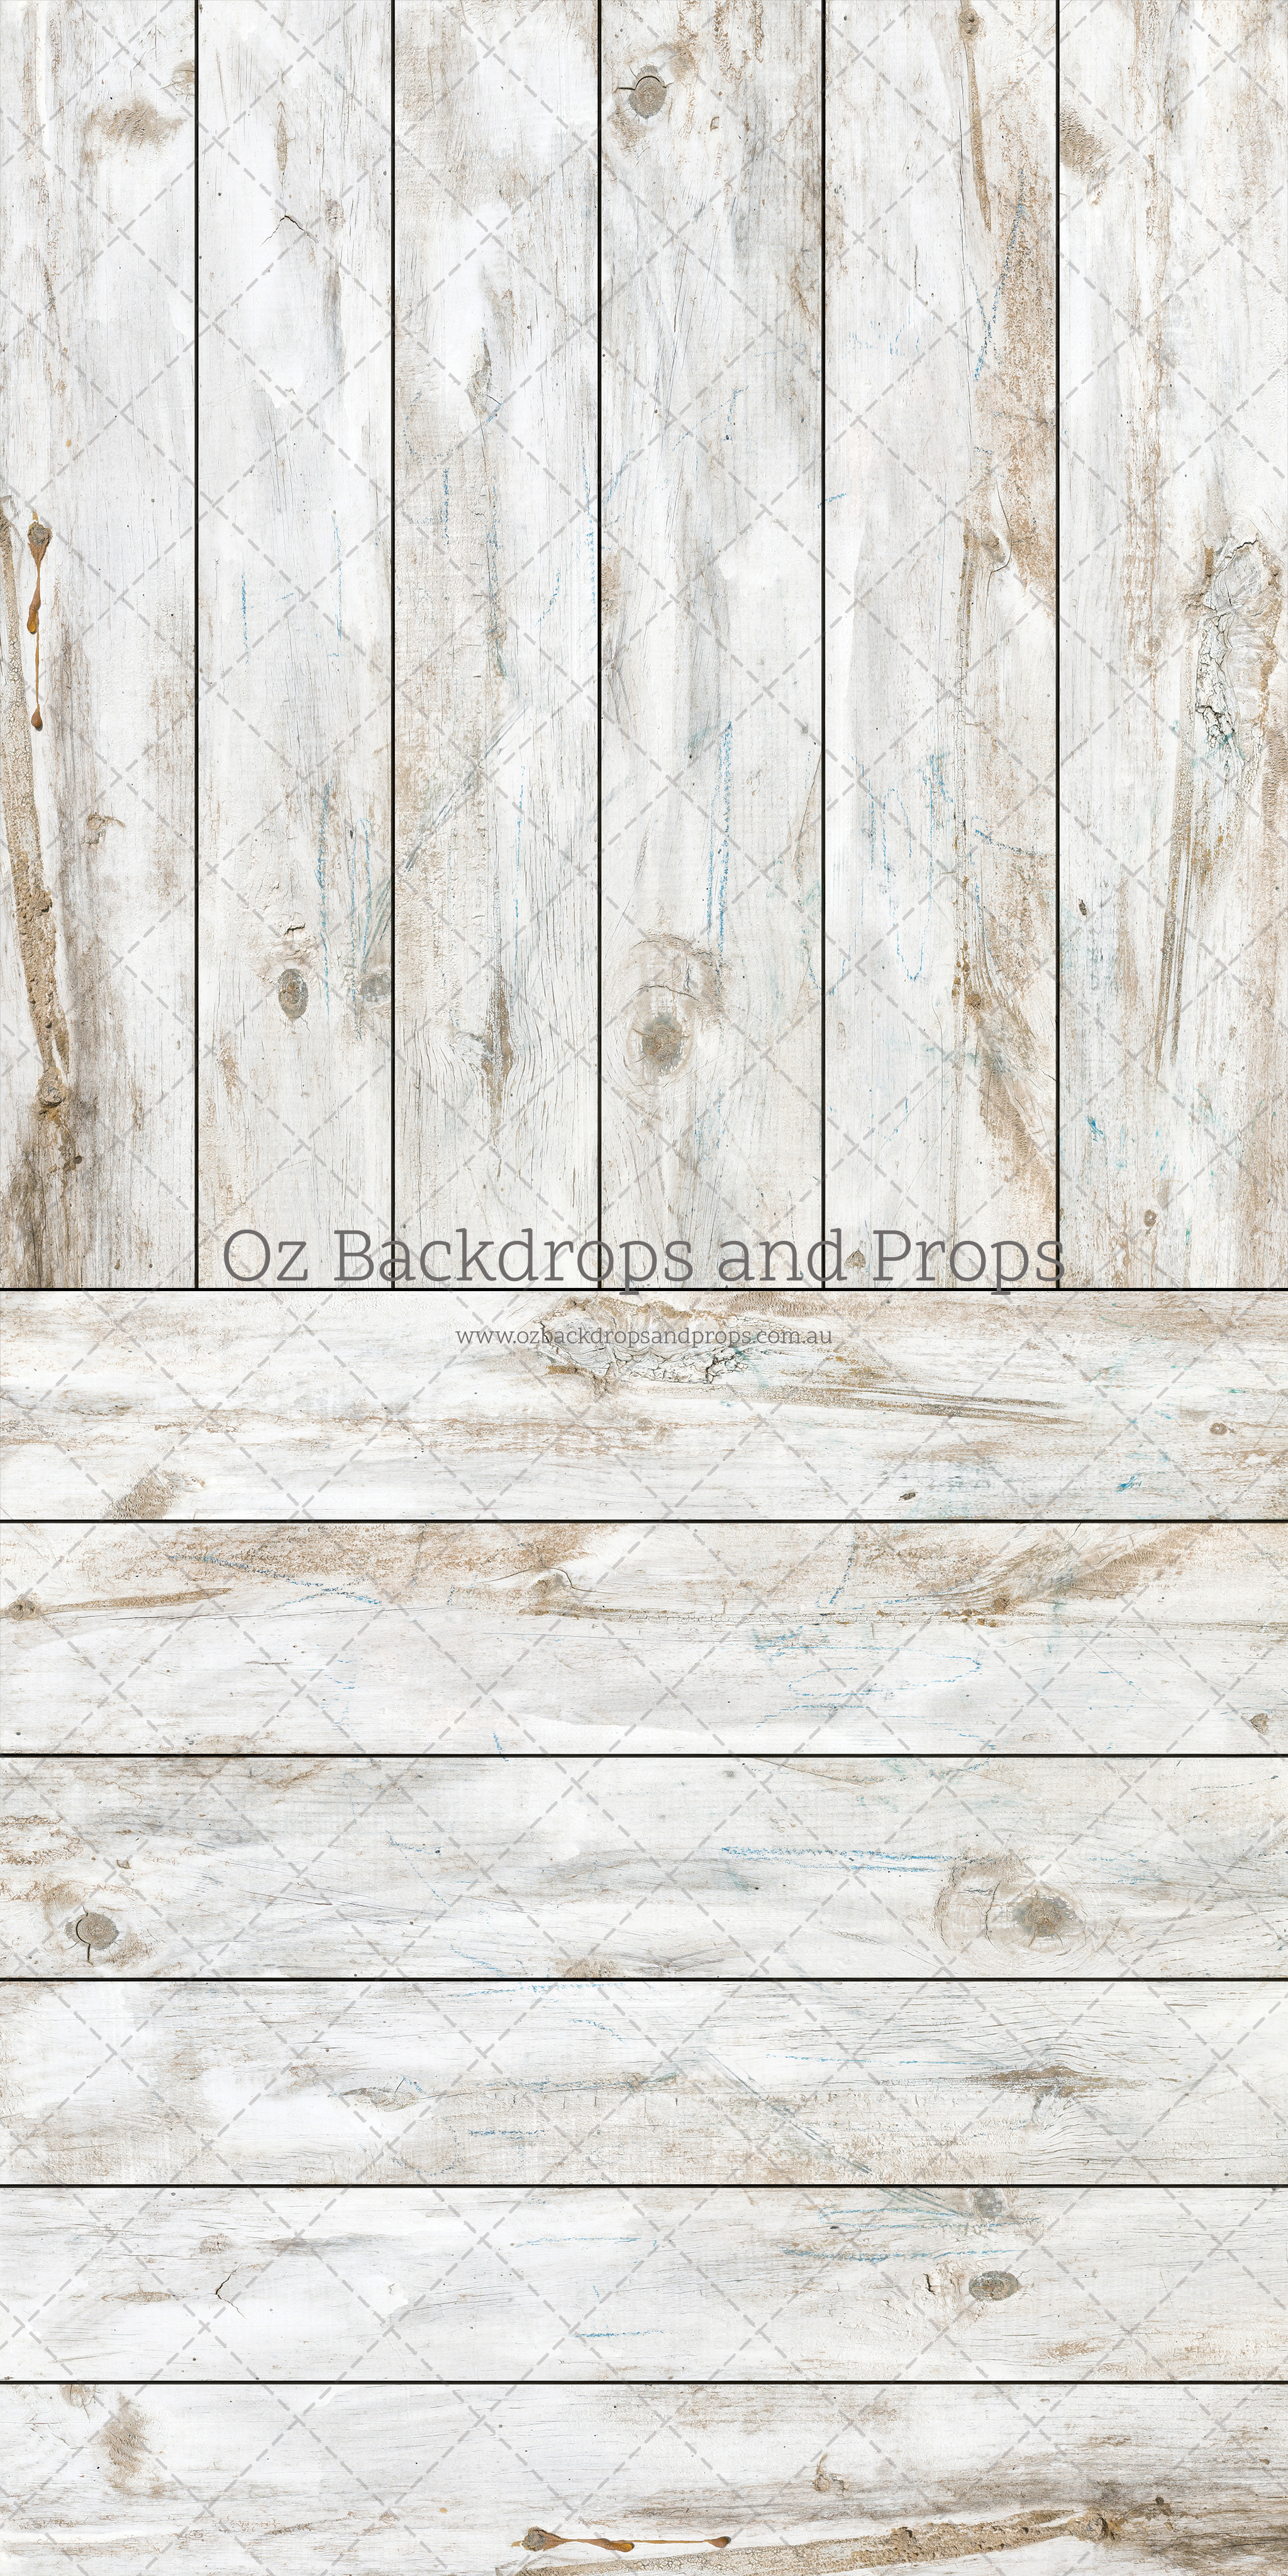 Beach House Planks Two in One - Oz Backdrops & Props